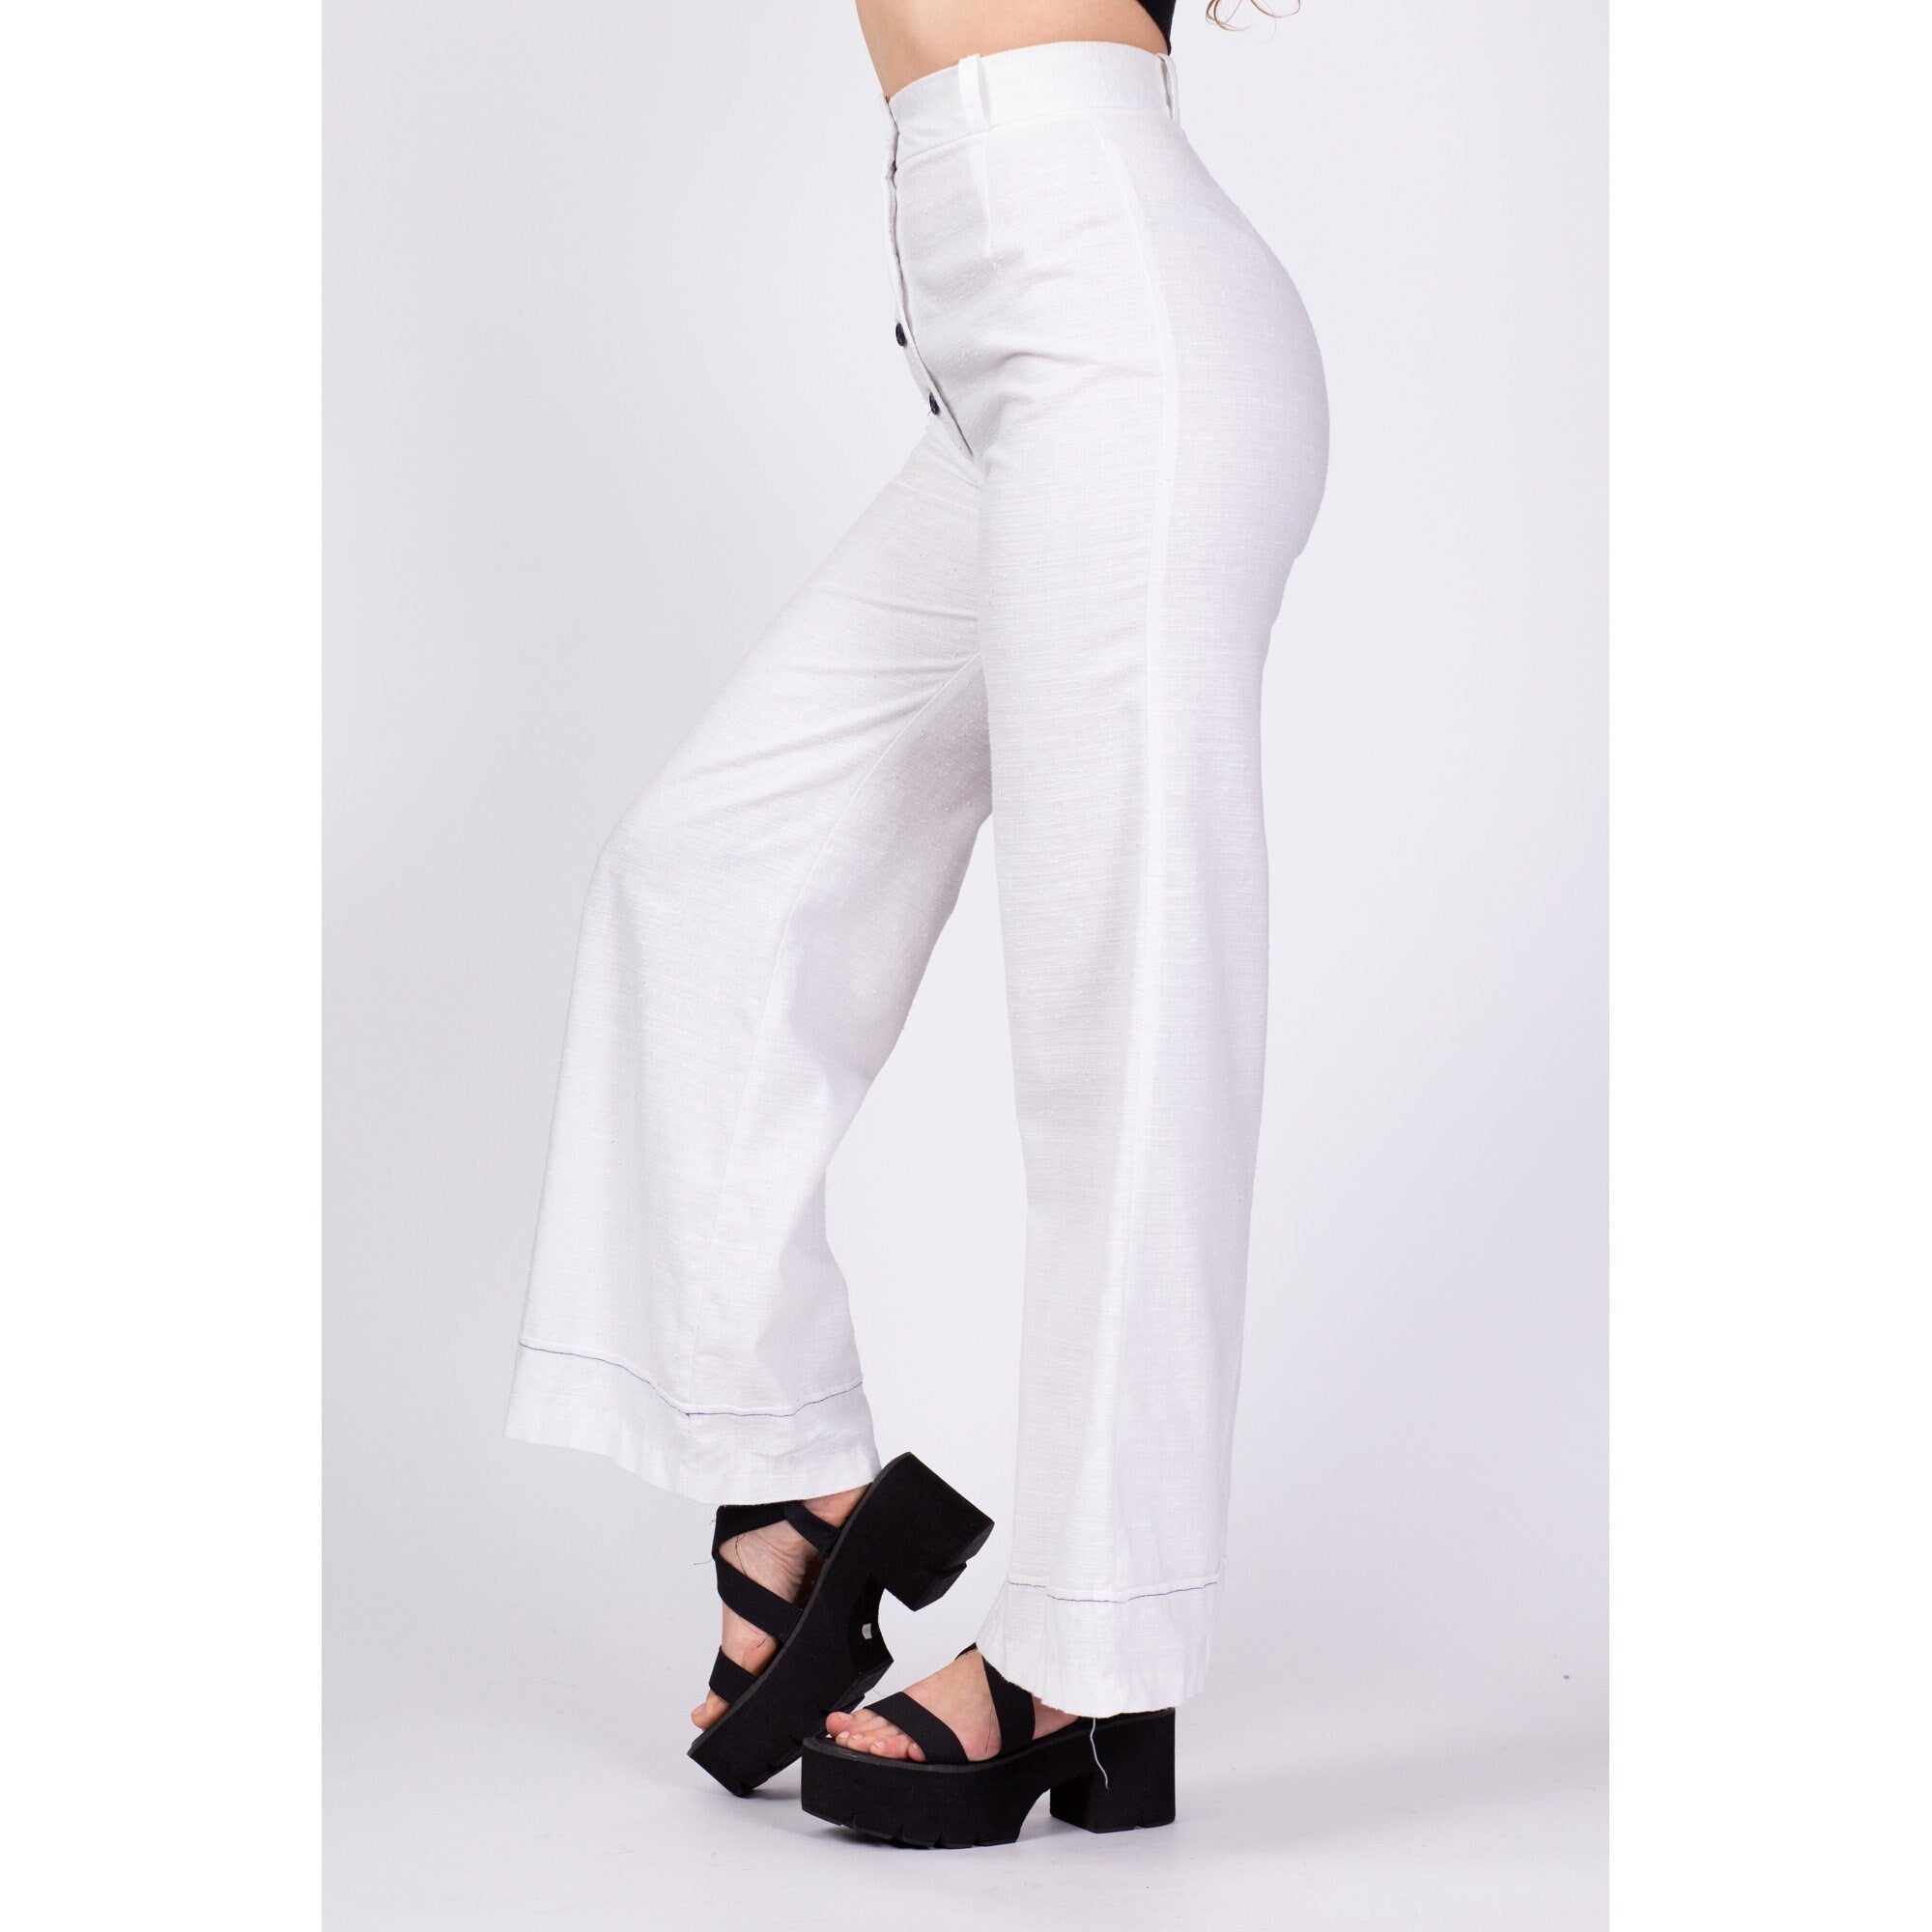 Women's Drawsting Beach Pants Solid Casual Hollow out Pants Knit Straight  Leg Pants Summer Comfy Playsuit Trousers(M,White) - Walmart.com